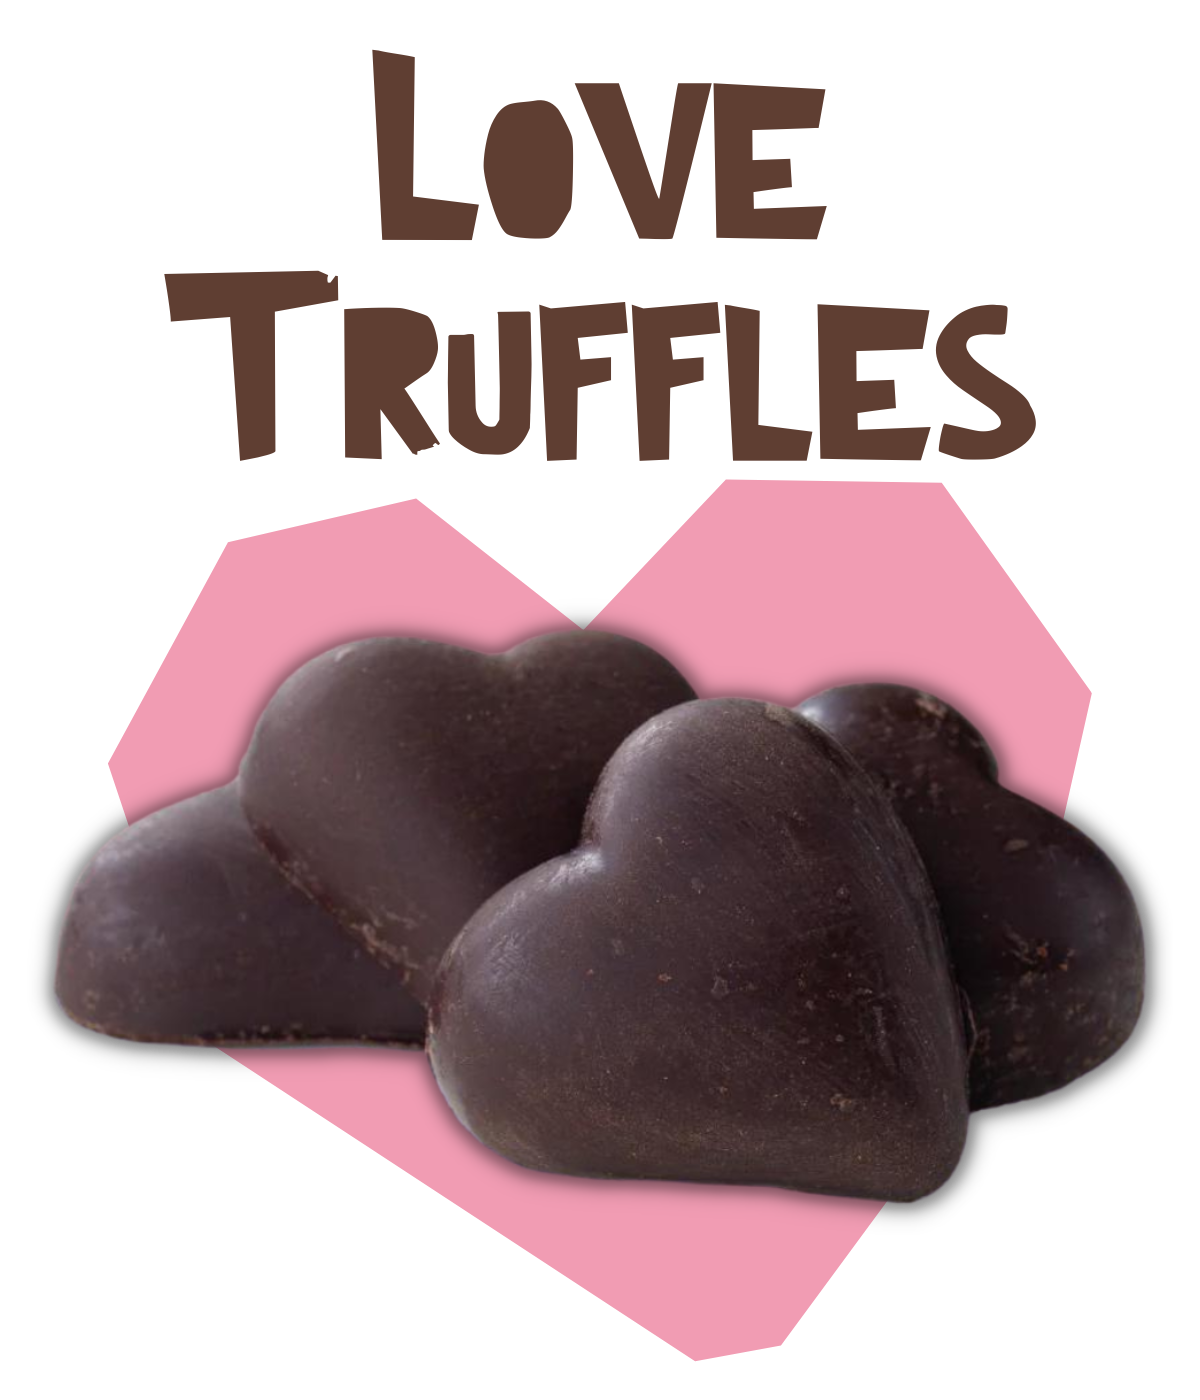 LIMITED EDITION - Love Truffles